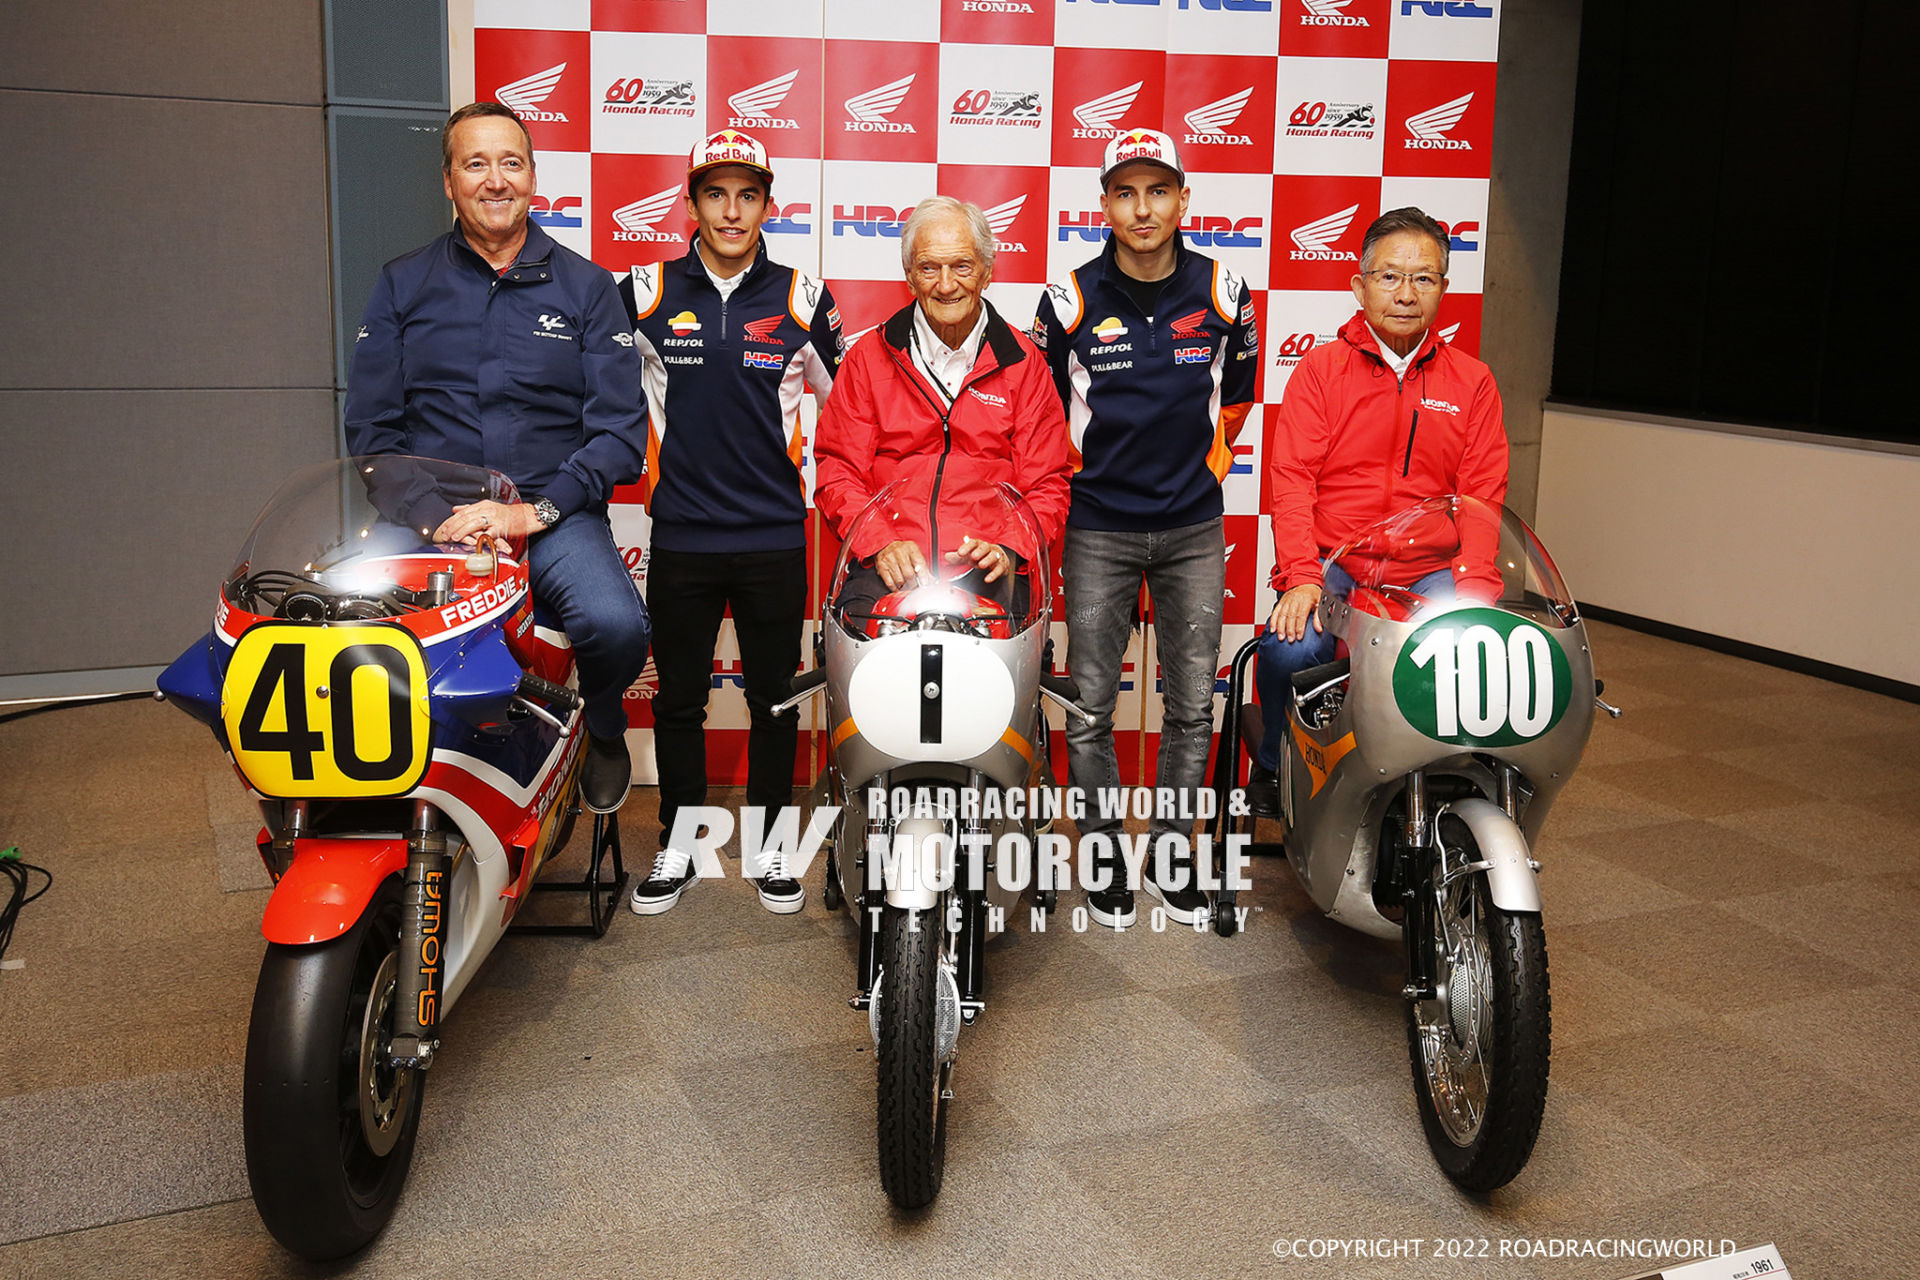 MotoGP riders Marc Marquez and Jorge Lorenzo met riders from Honda’s early GP days during an event held in conjunction with the 2019 Japanese GP at Motegi. From left are Freddie Spencer on the #40 Honda NS500 three-cylinder two-stroke he rode to his first 500cc GP World Championship race win on July 4th, 1982; Jim Redman on the #1 Honda 250cc RC164 4-cylinder he rode to the 1963 World Championship; and Kunimitsu Takahashi on the #100 1962 Honda 250cc RC162 4-cylinder. Photo courtesy Dorna.